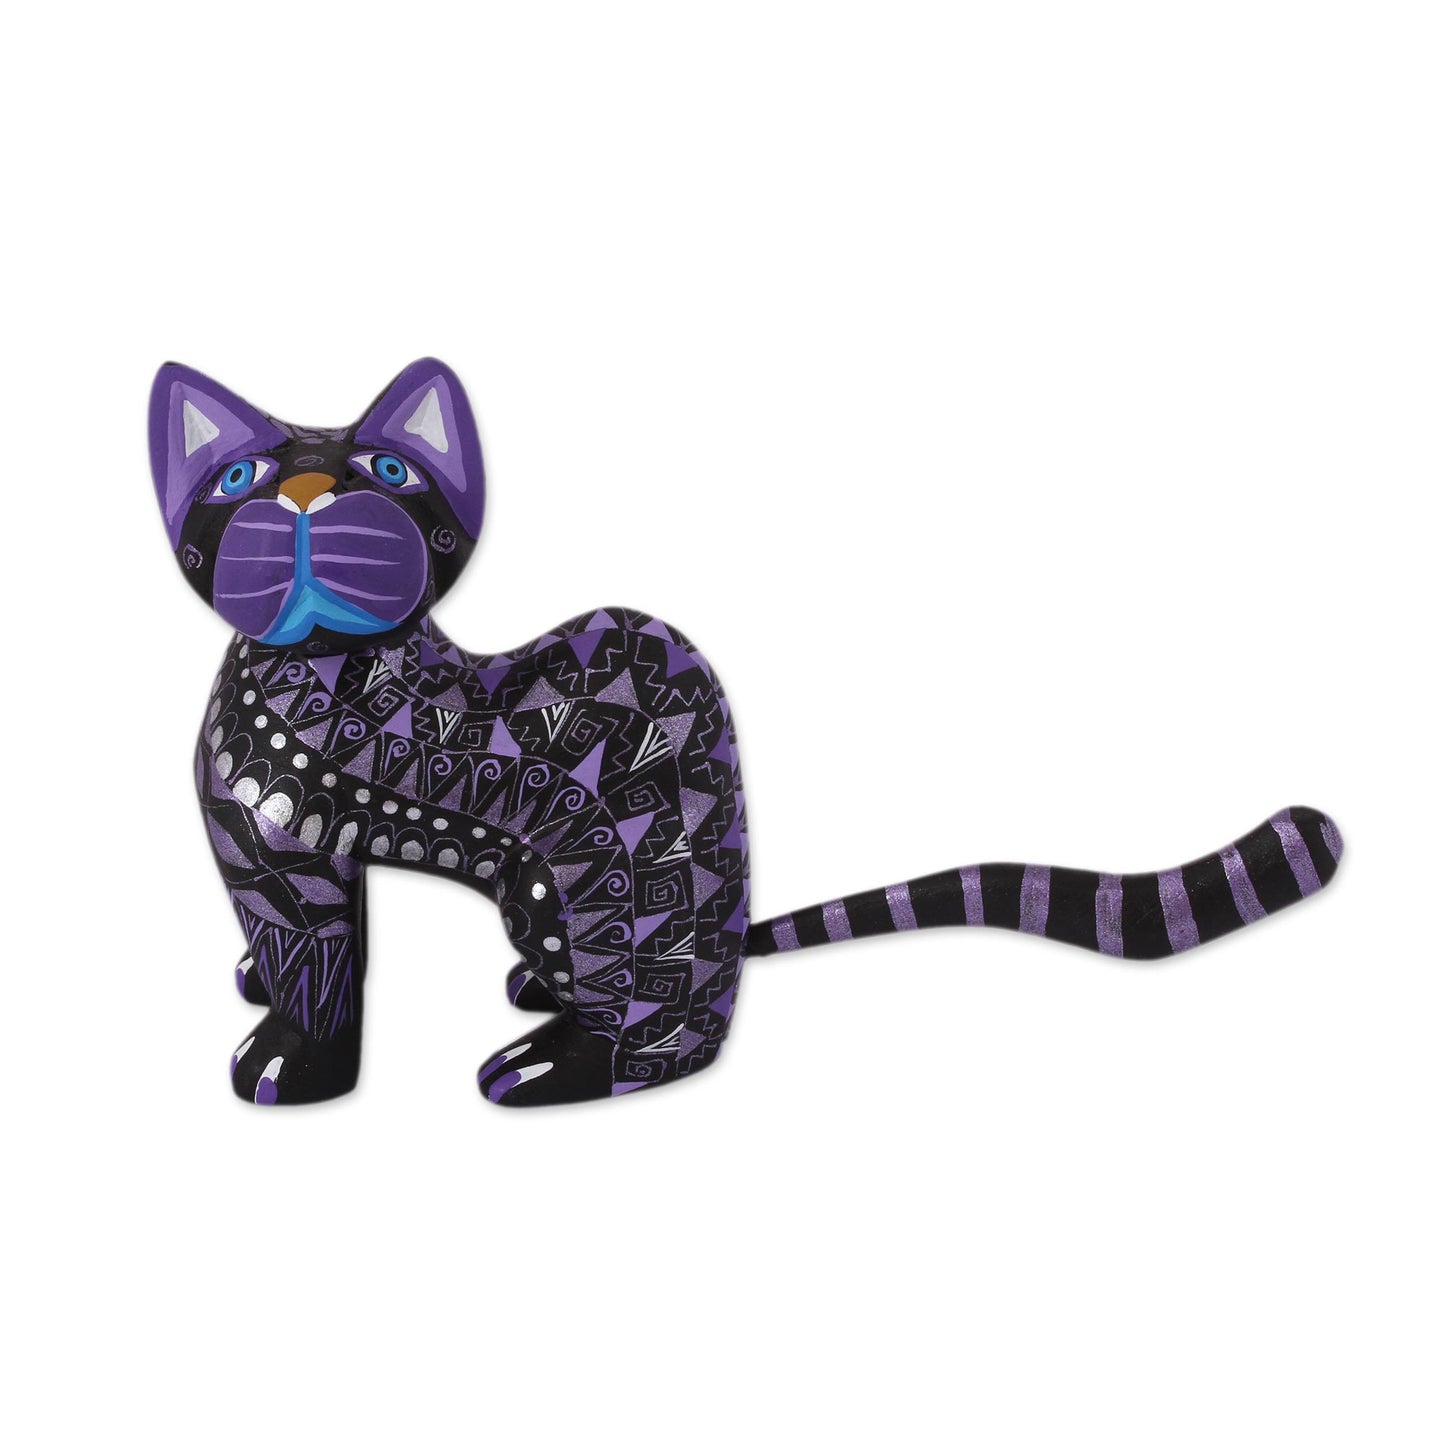 Sophisticated Cat Black Alebrije Cat Silver and Purple Hand Painted Motifs